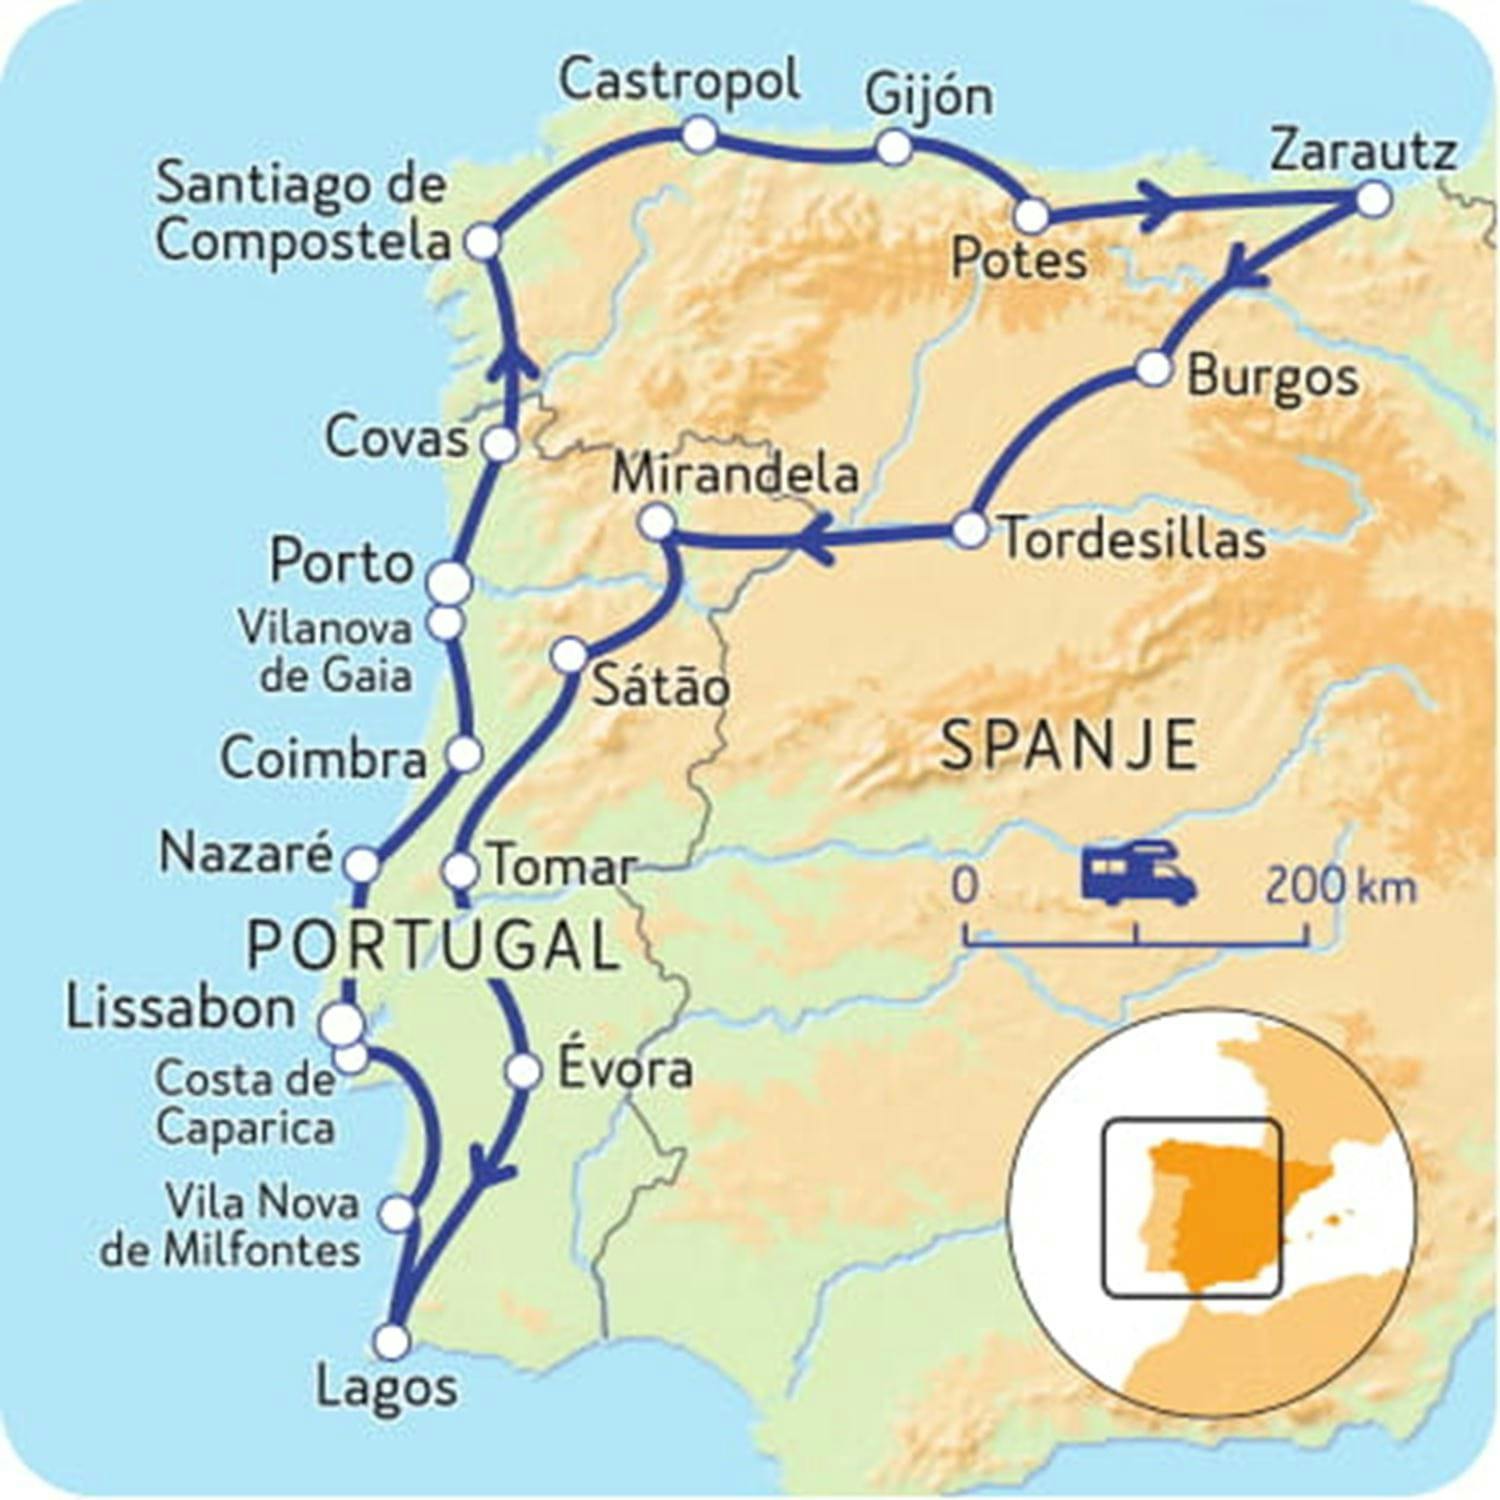 route - Campercontact Motorhome Trip - From Basque Country to Algarve